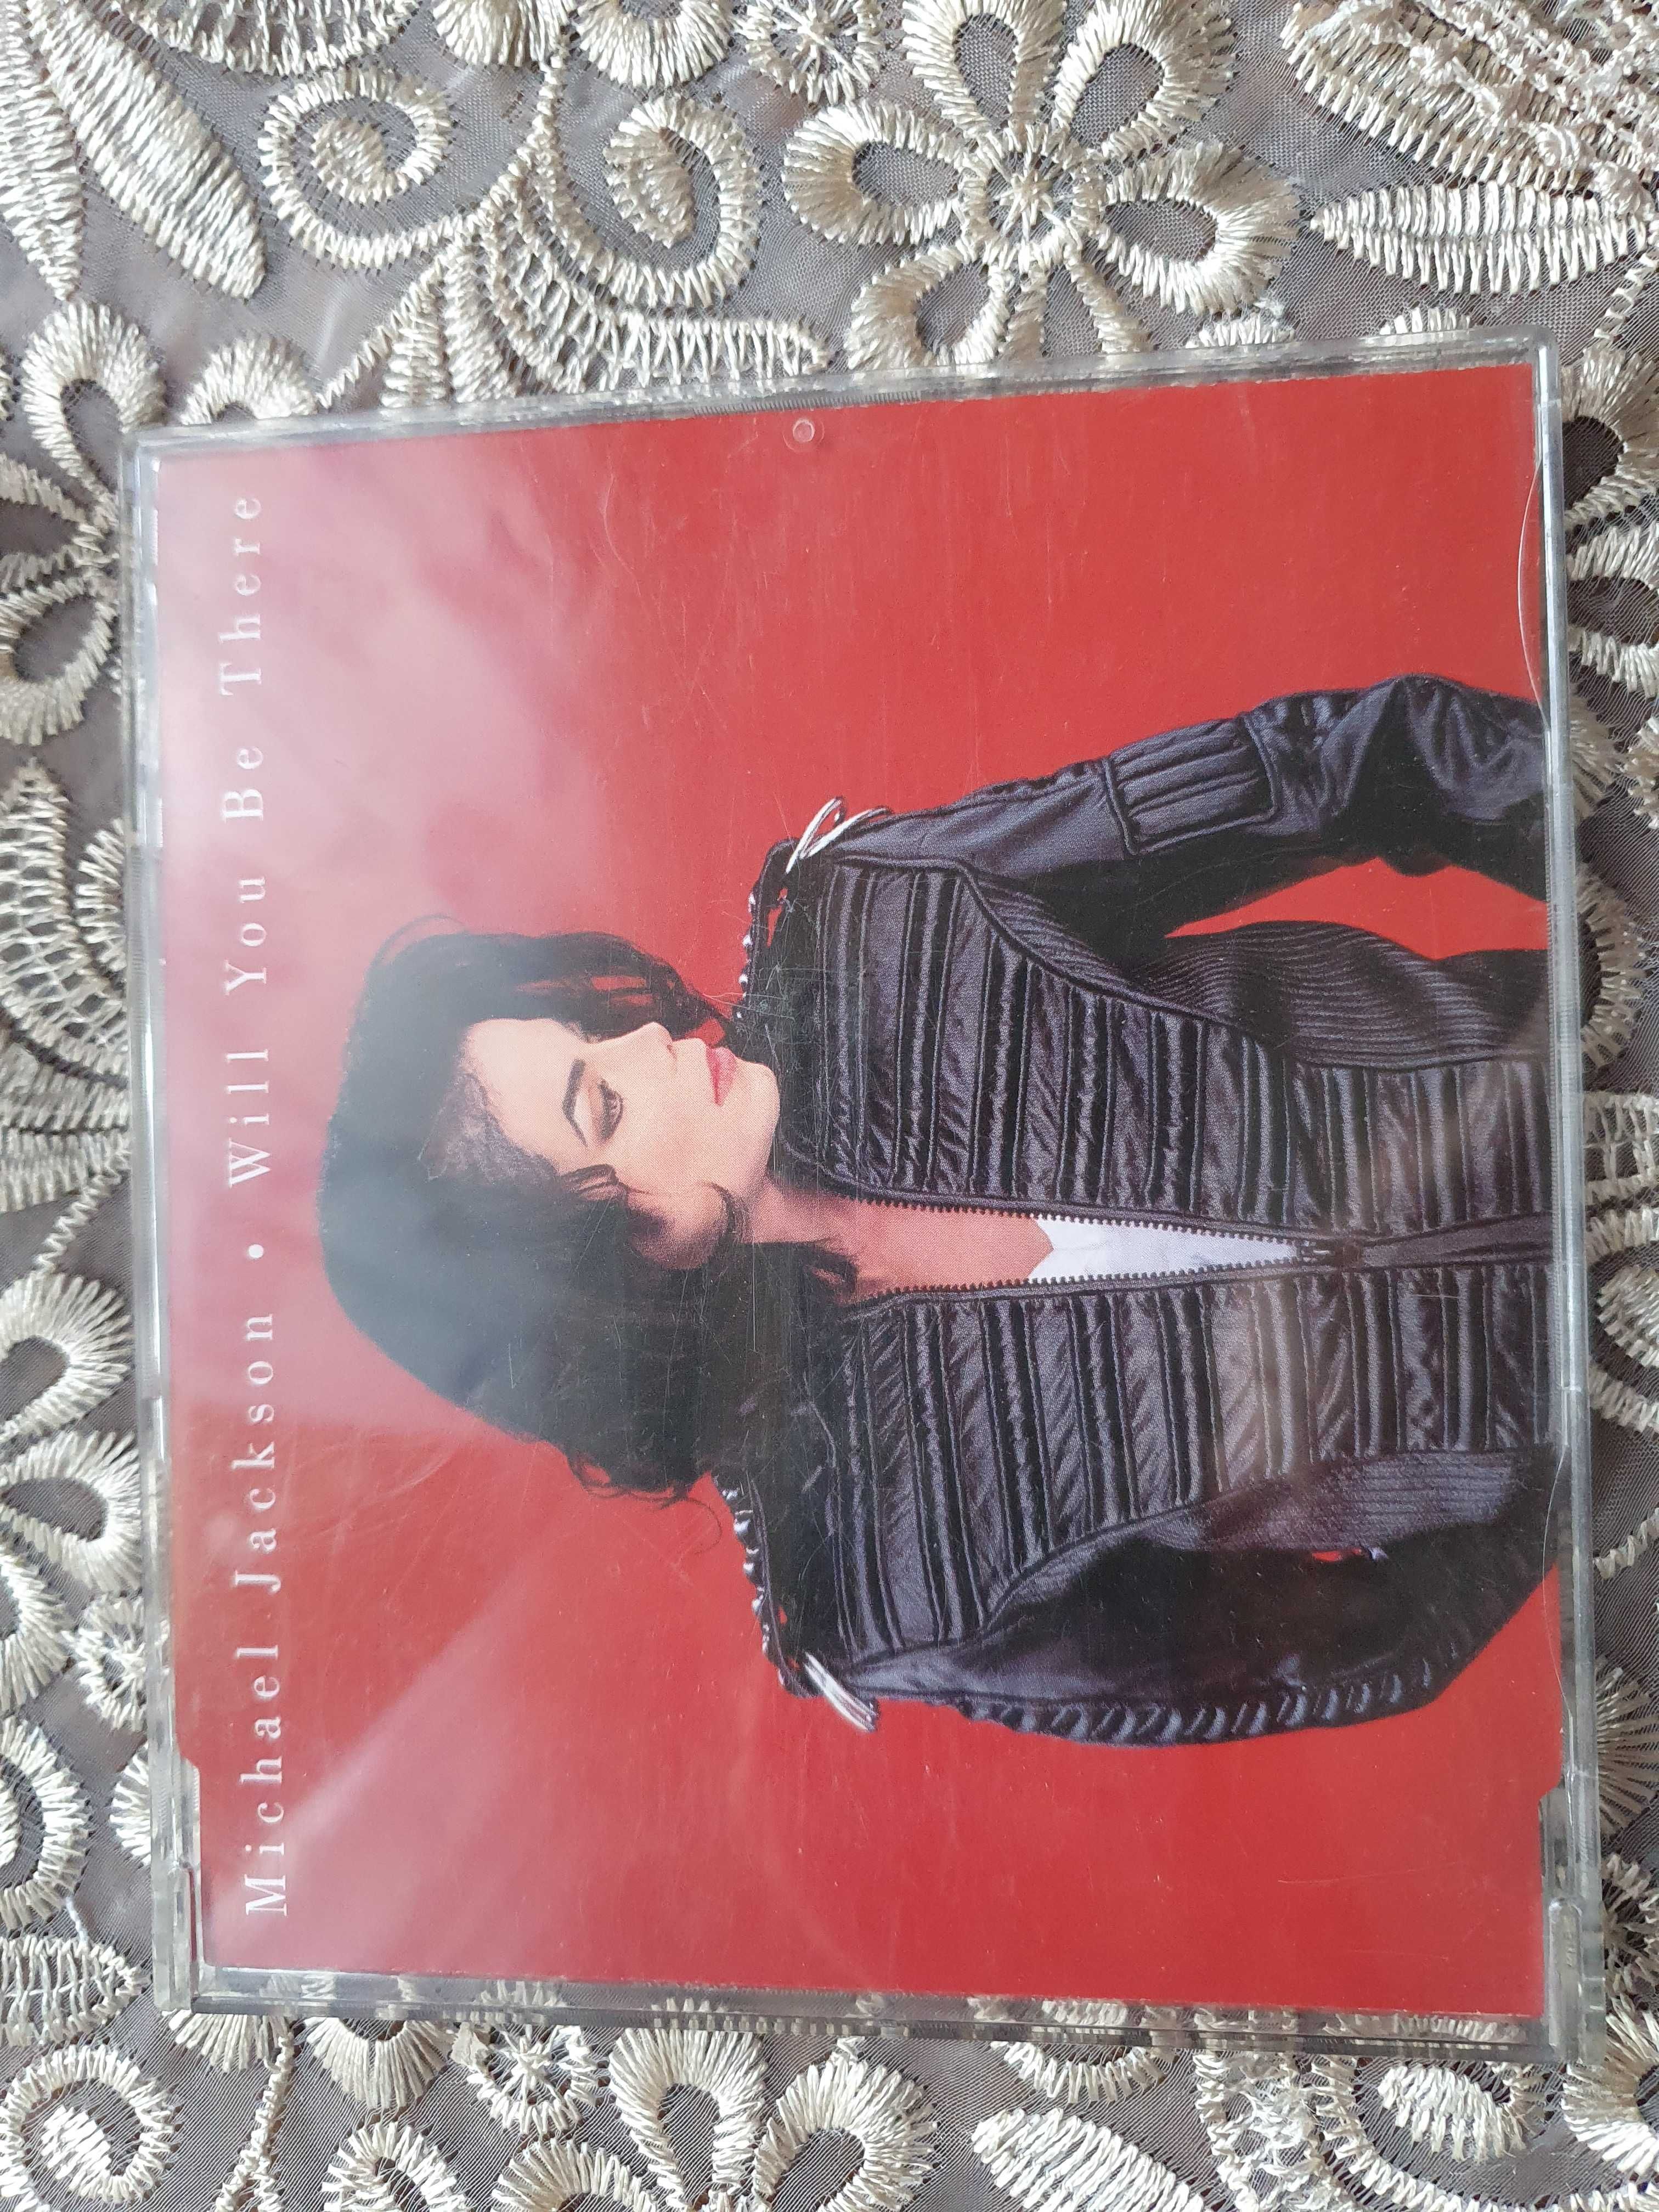 Michael Jackson Will You Be There (single CD)